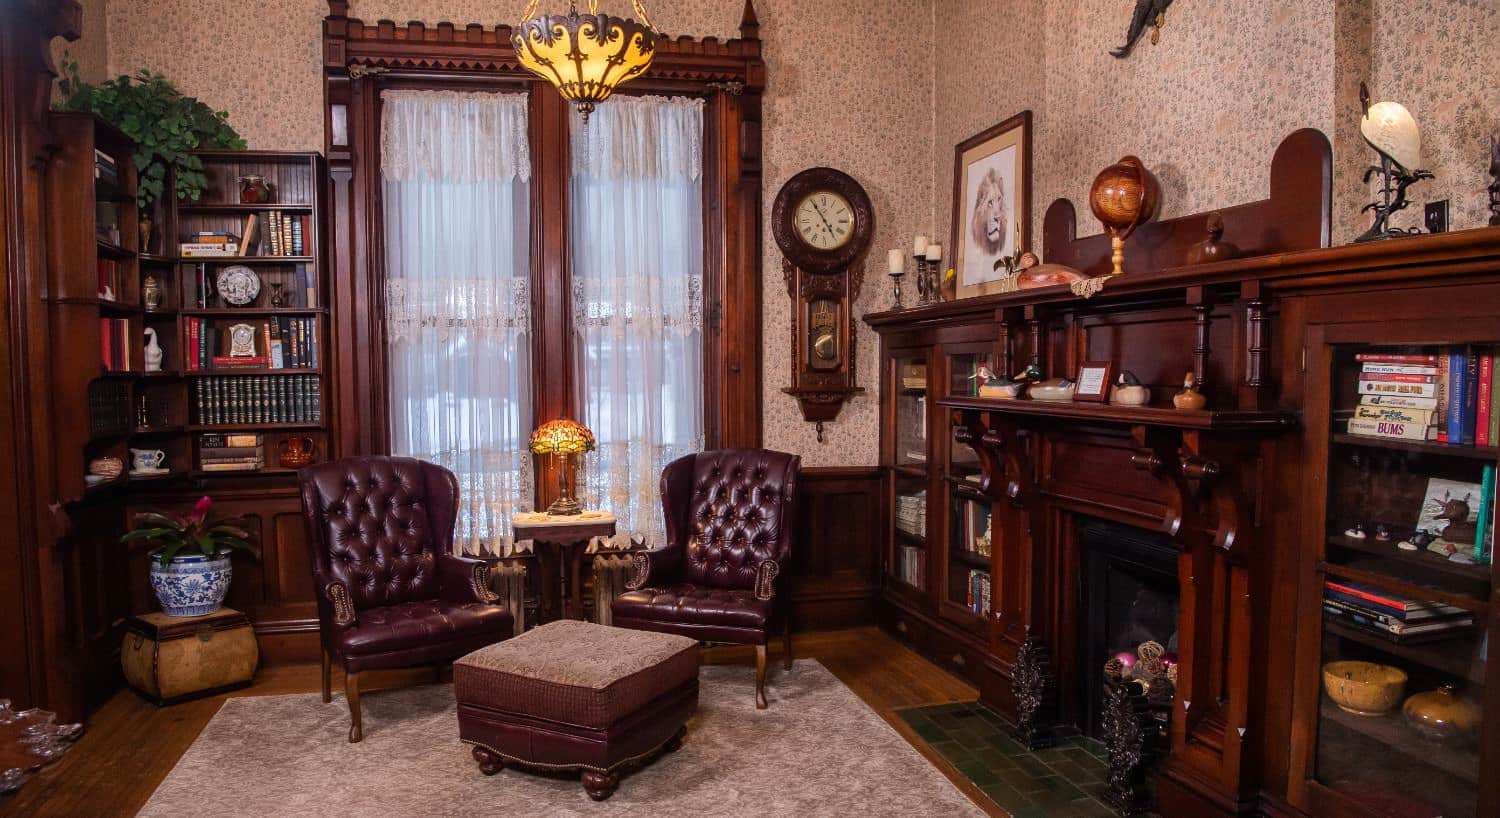 Study with dark wooden cabinets, wooden fireplace, two leather armchairs and ottoman, and large windows